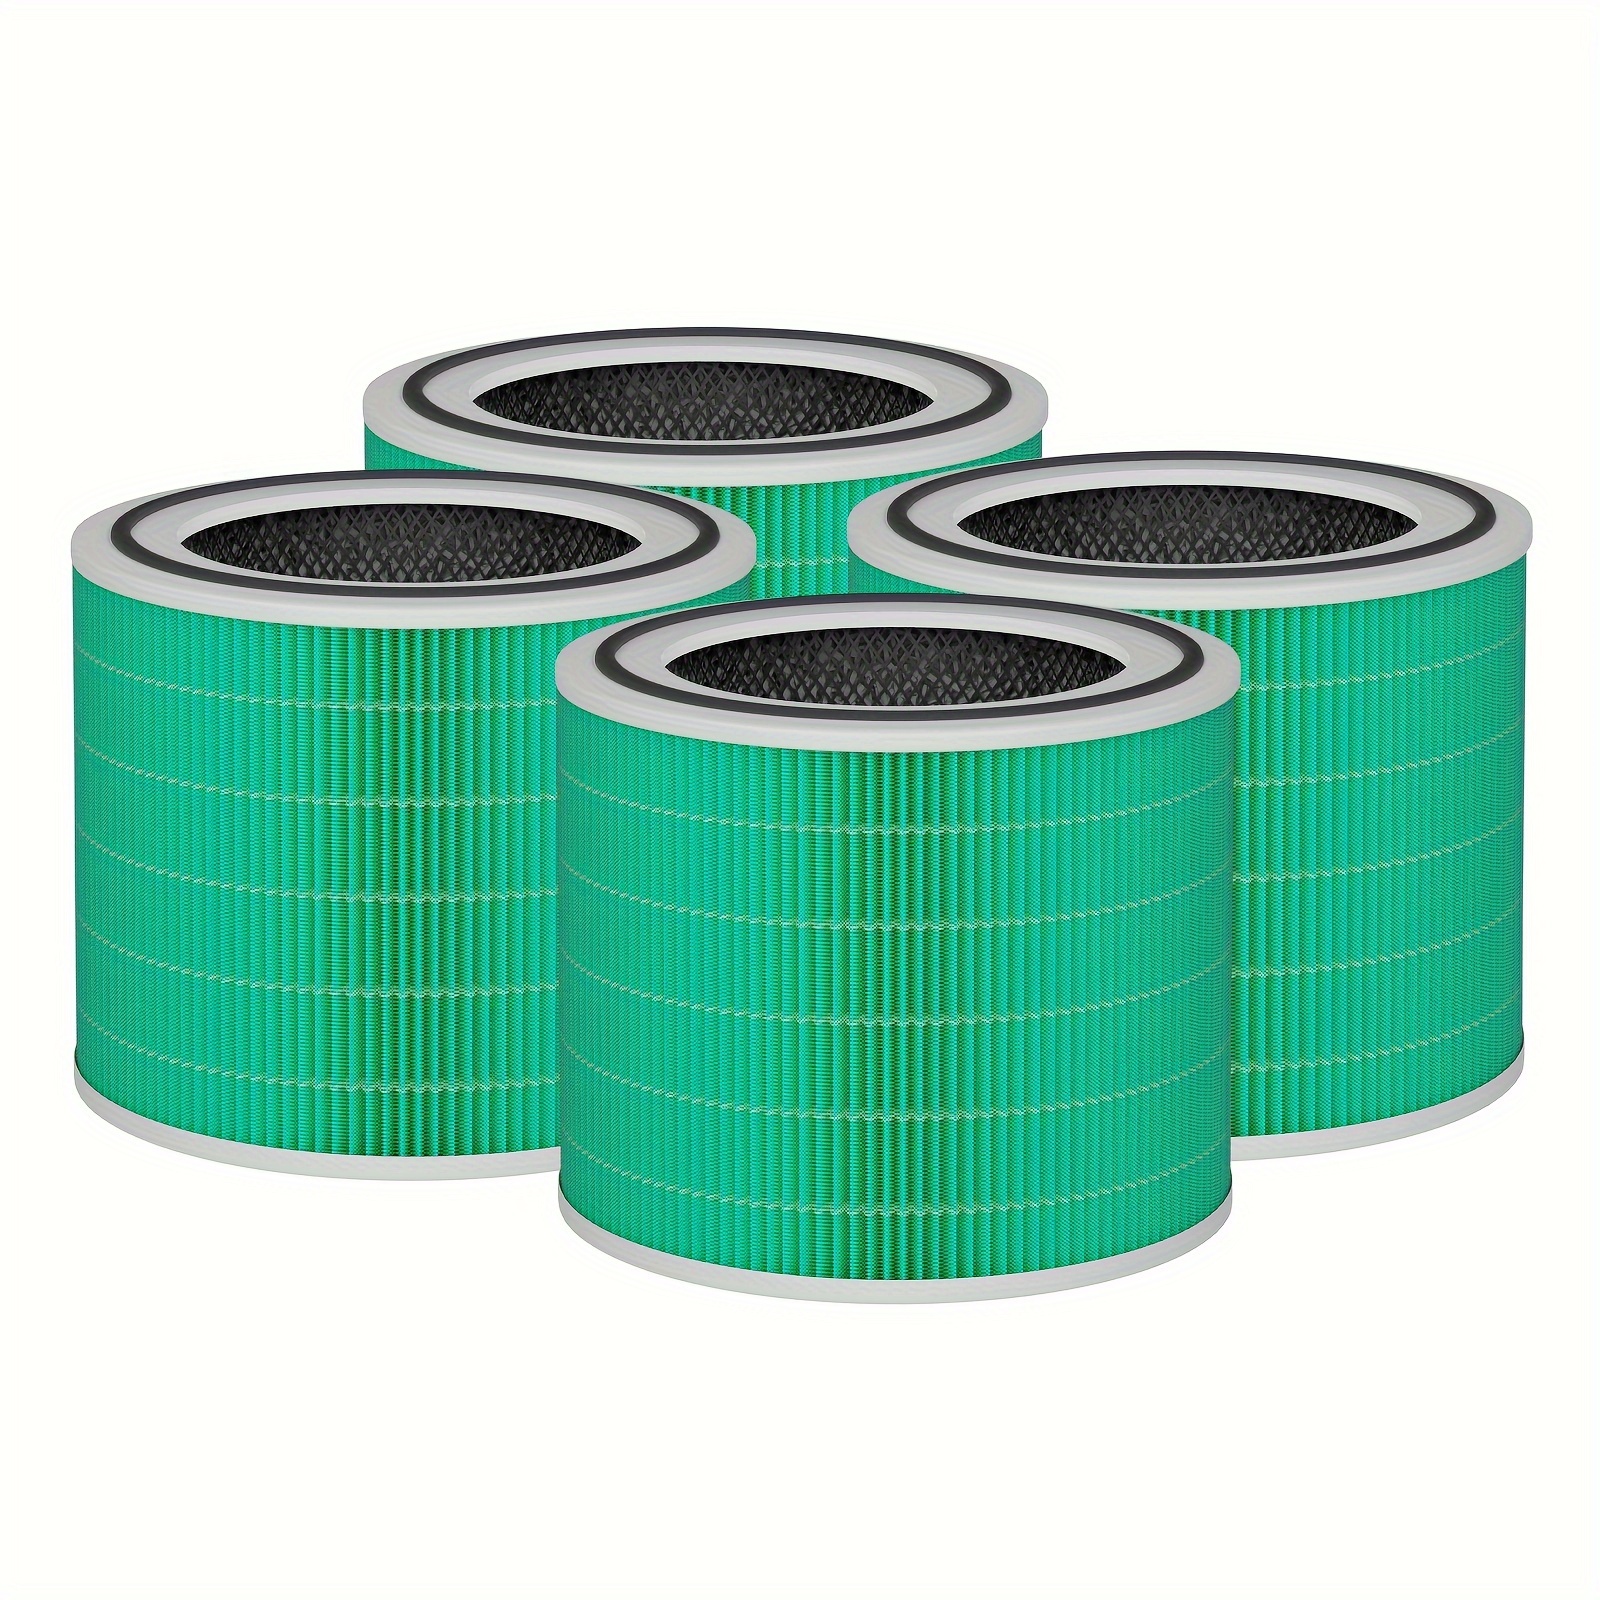  Core 300 To-xin Absorber Replacement Filter for LEVOIT Core 300  and Core 300S Air Purifier, 1 Pack 3-in-1 H13 Grade True HEPA Filter  Replacement, Compared to Part # Core 300-RF-TX (Green) 